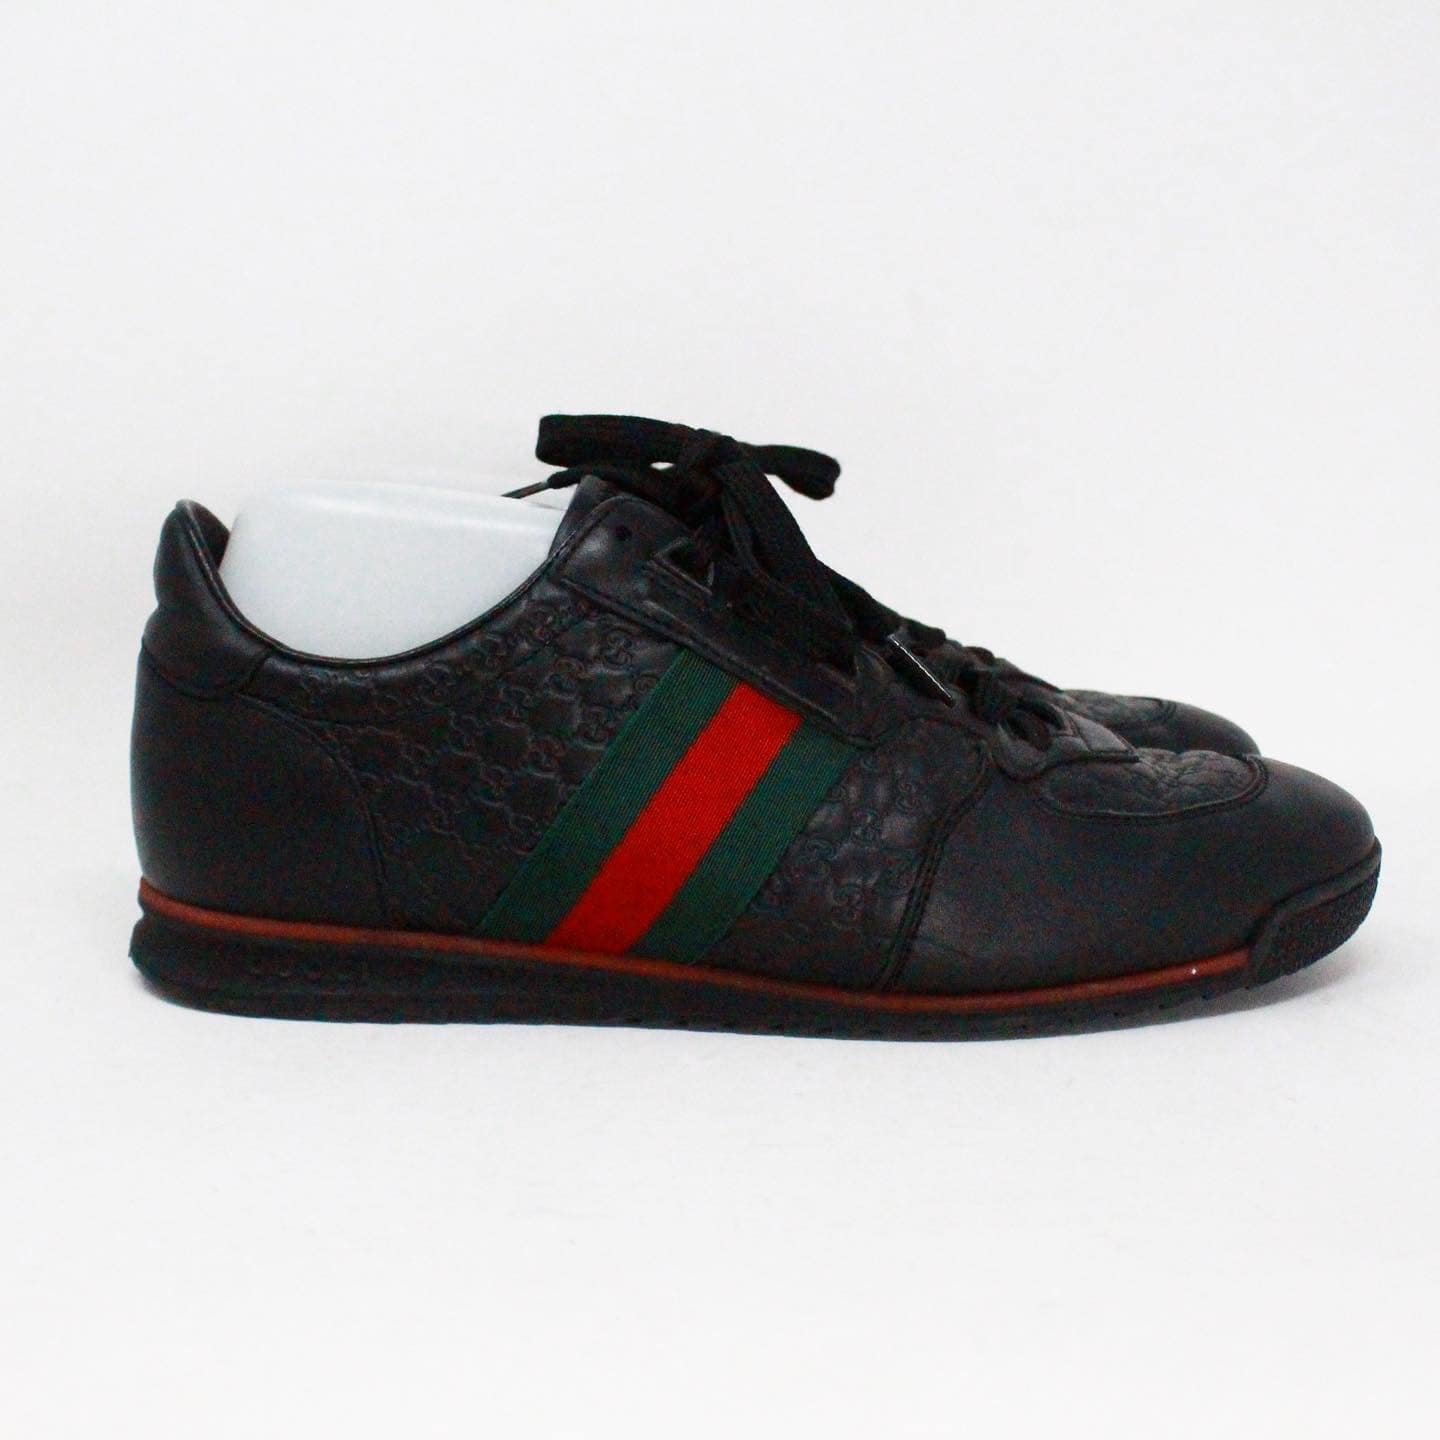 GUCCI #40281 Black Leather GG Embossed Sneakers (US 7.5 EU 37.5)